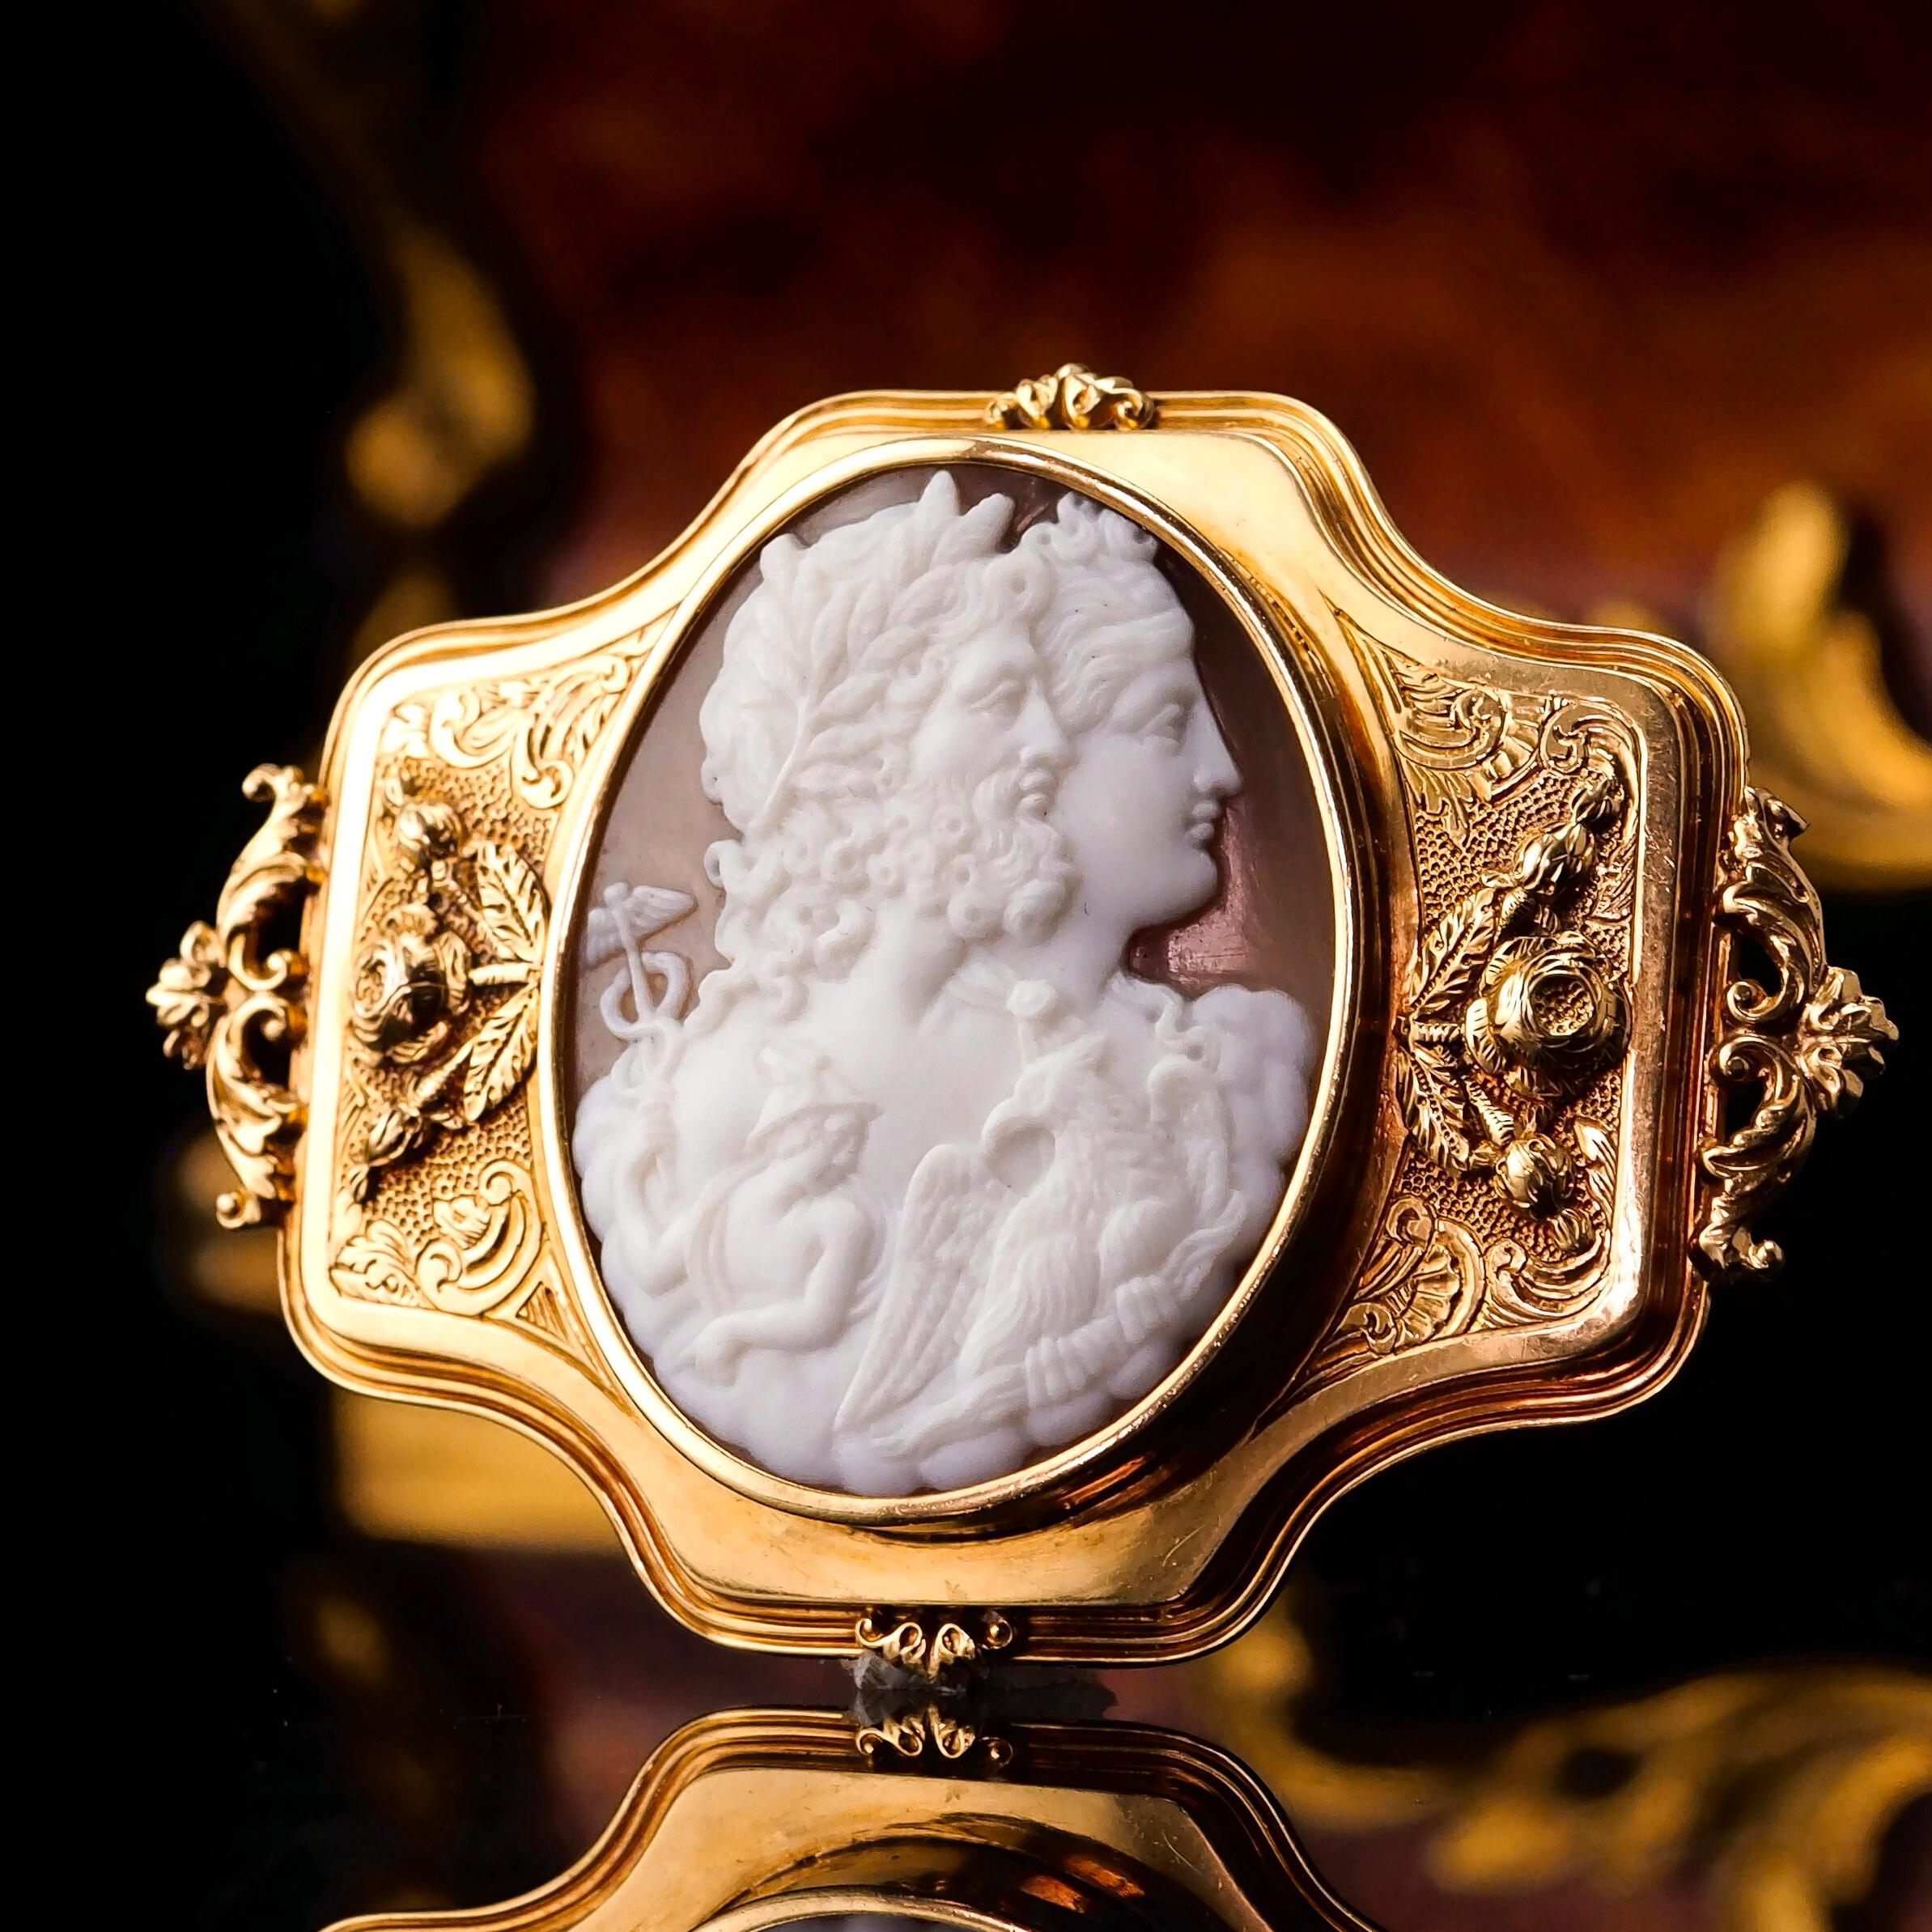 Welcome to Artisan Antiques based in Mayfair, London - We are delighted to offer this spectacular large antique 18ct gold shell cameo made c.1860, most likely in France.  

Price negotiations may be possible under certain criteria, please contact us